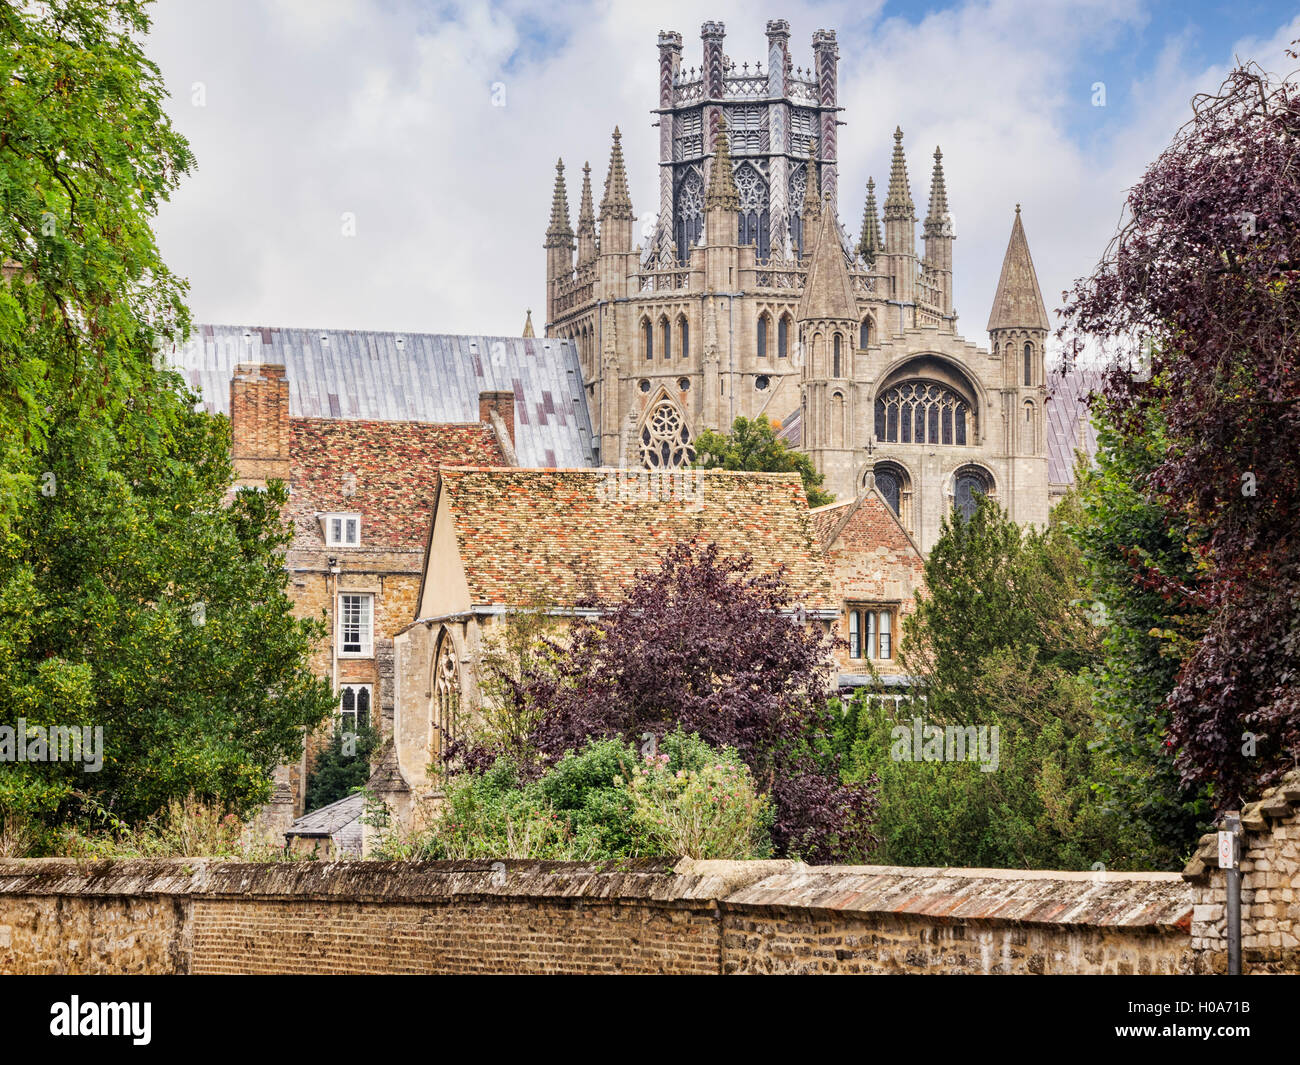 Ely Cathedral, with its famous octagonal tower, Cambridgeshire, England, UK Stock Photo